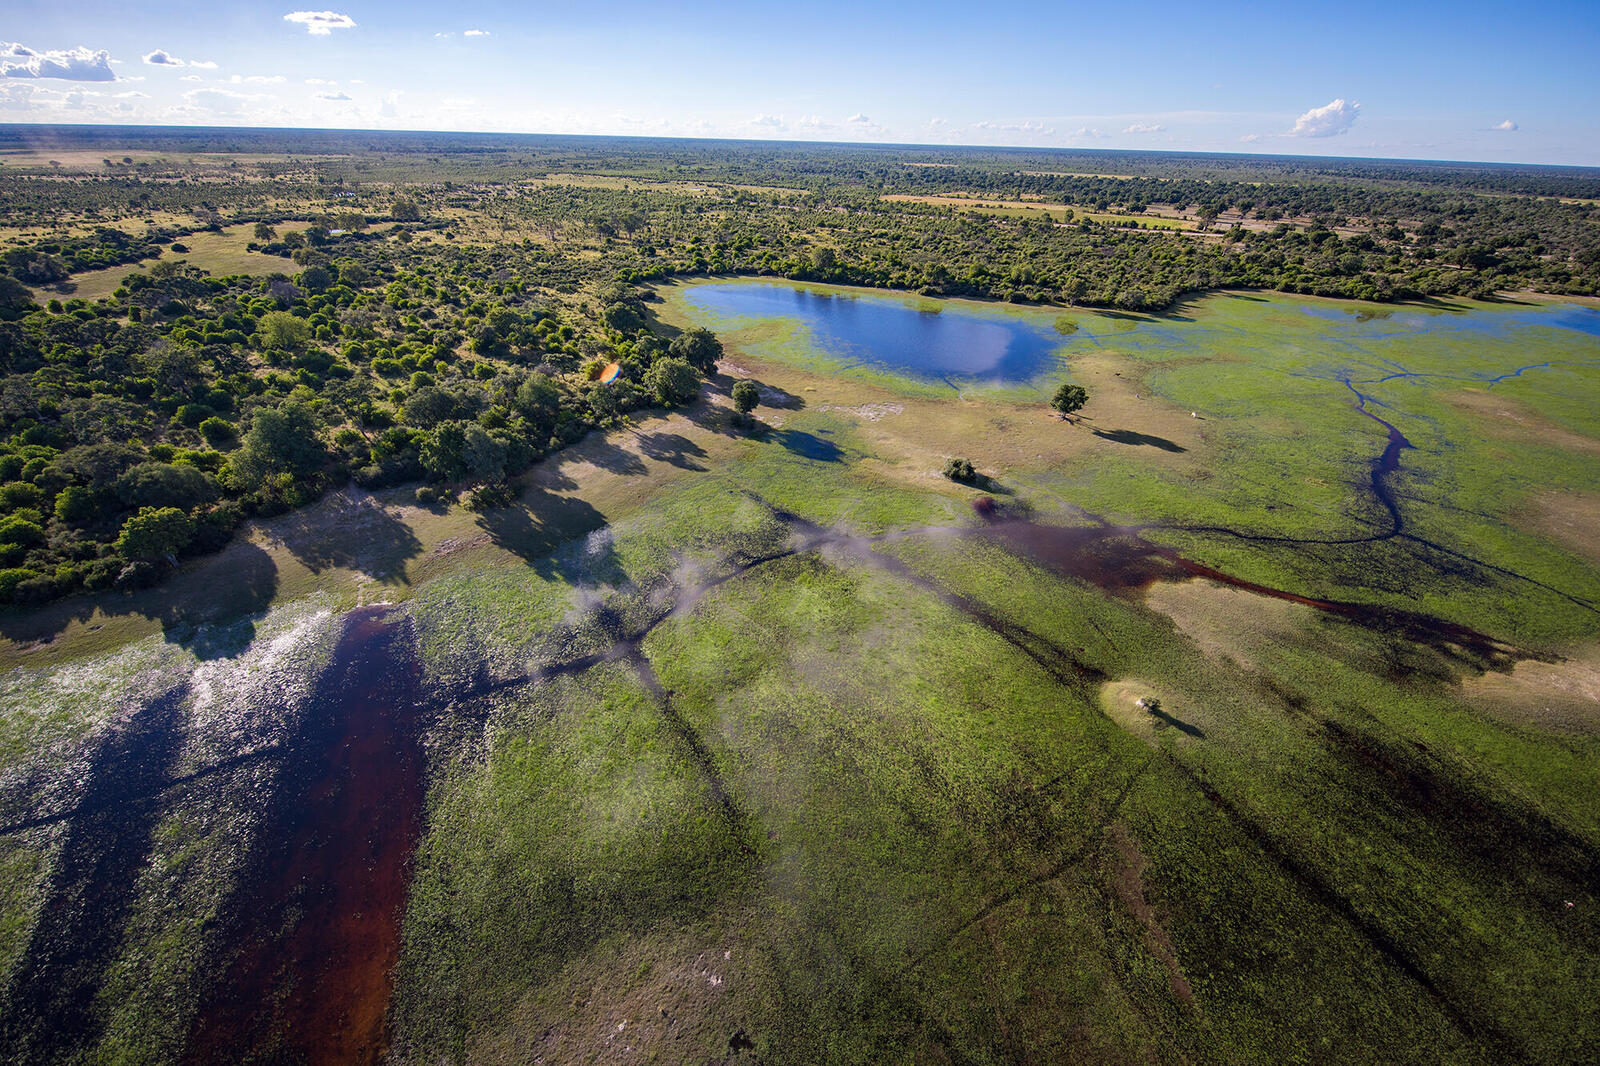 Aerial landscape showing grass, trees, and water